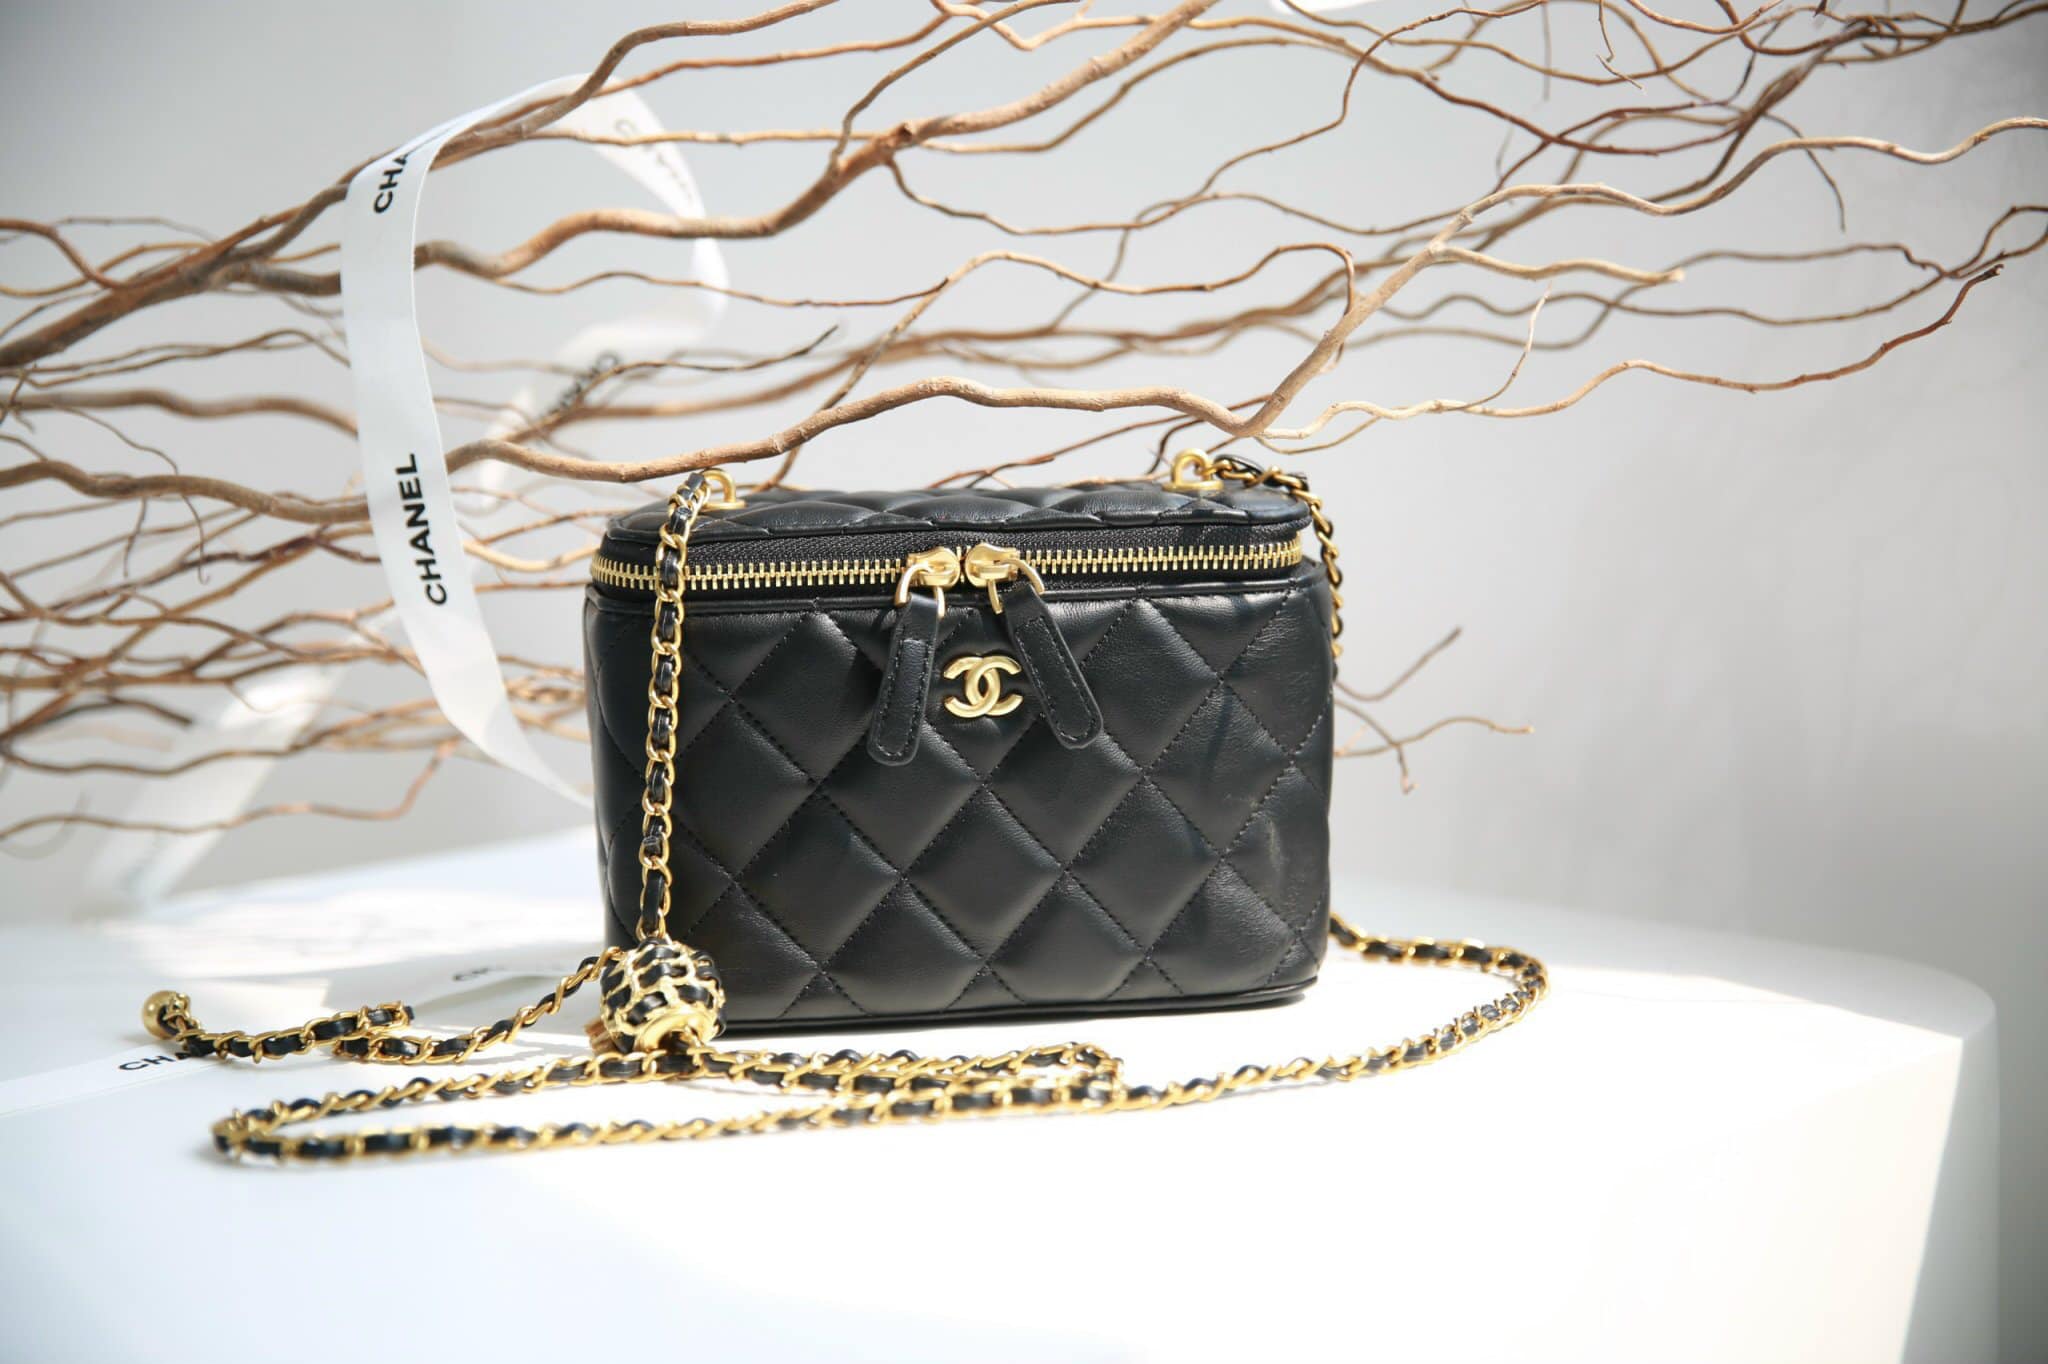 Cheap Best HighQuality Replica Chanel bags and Purses on Sale